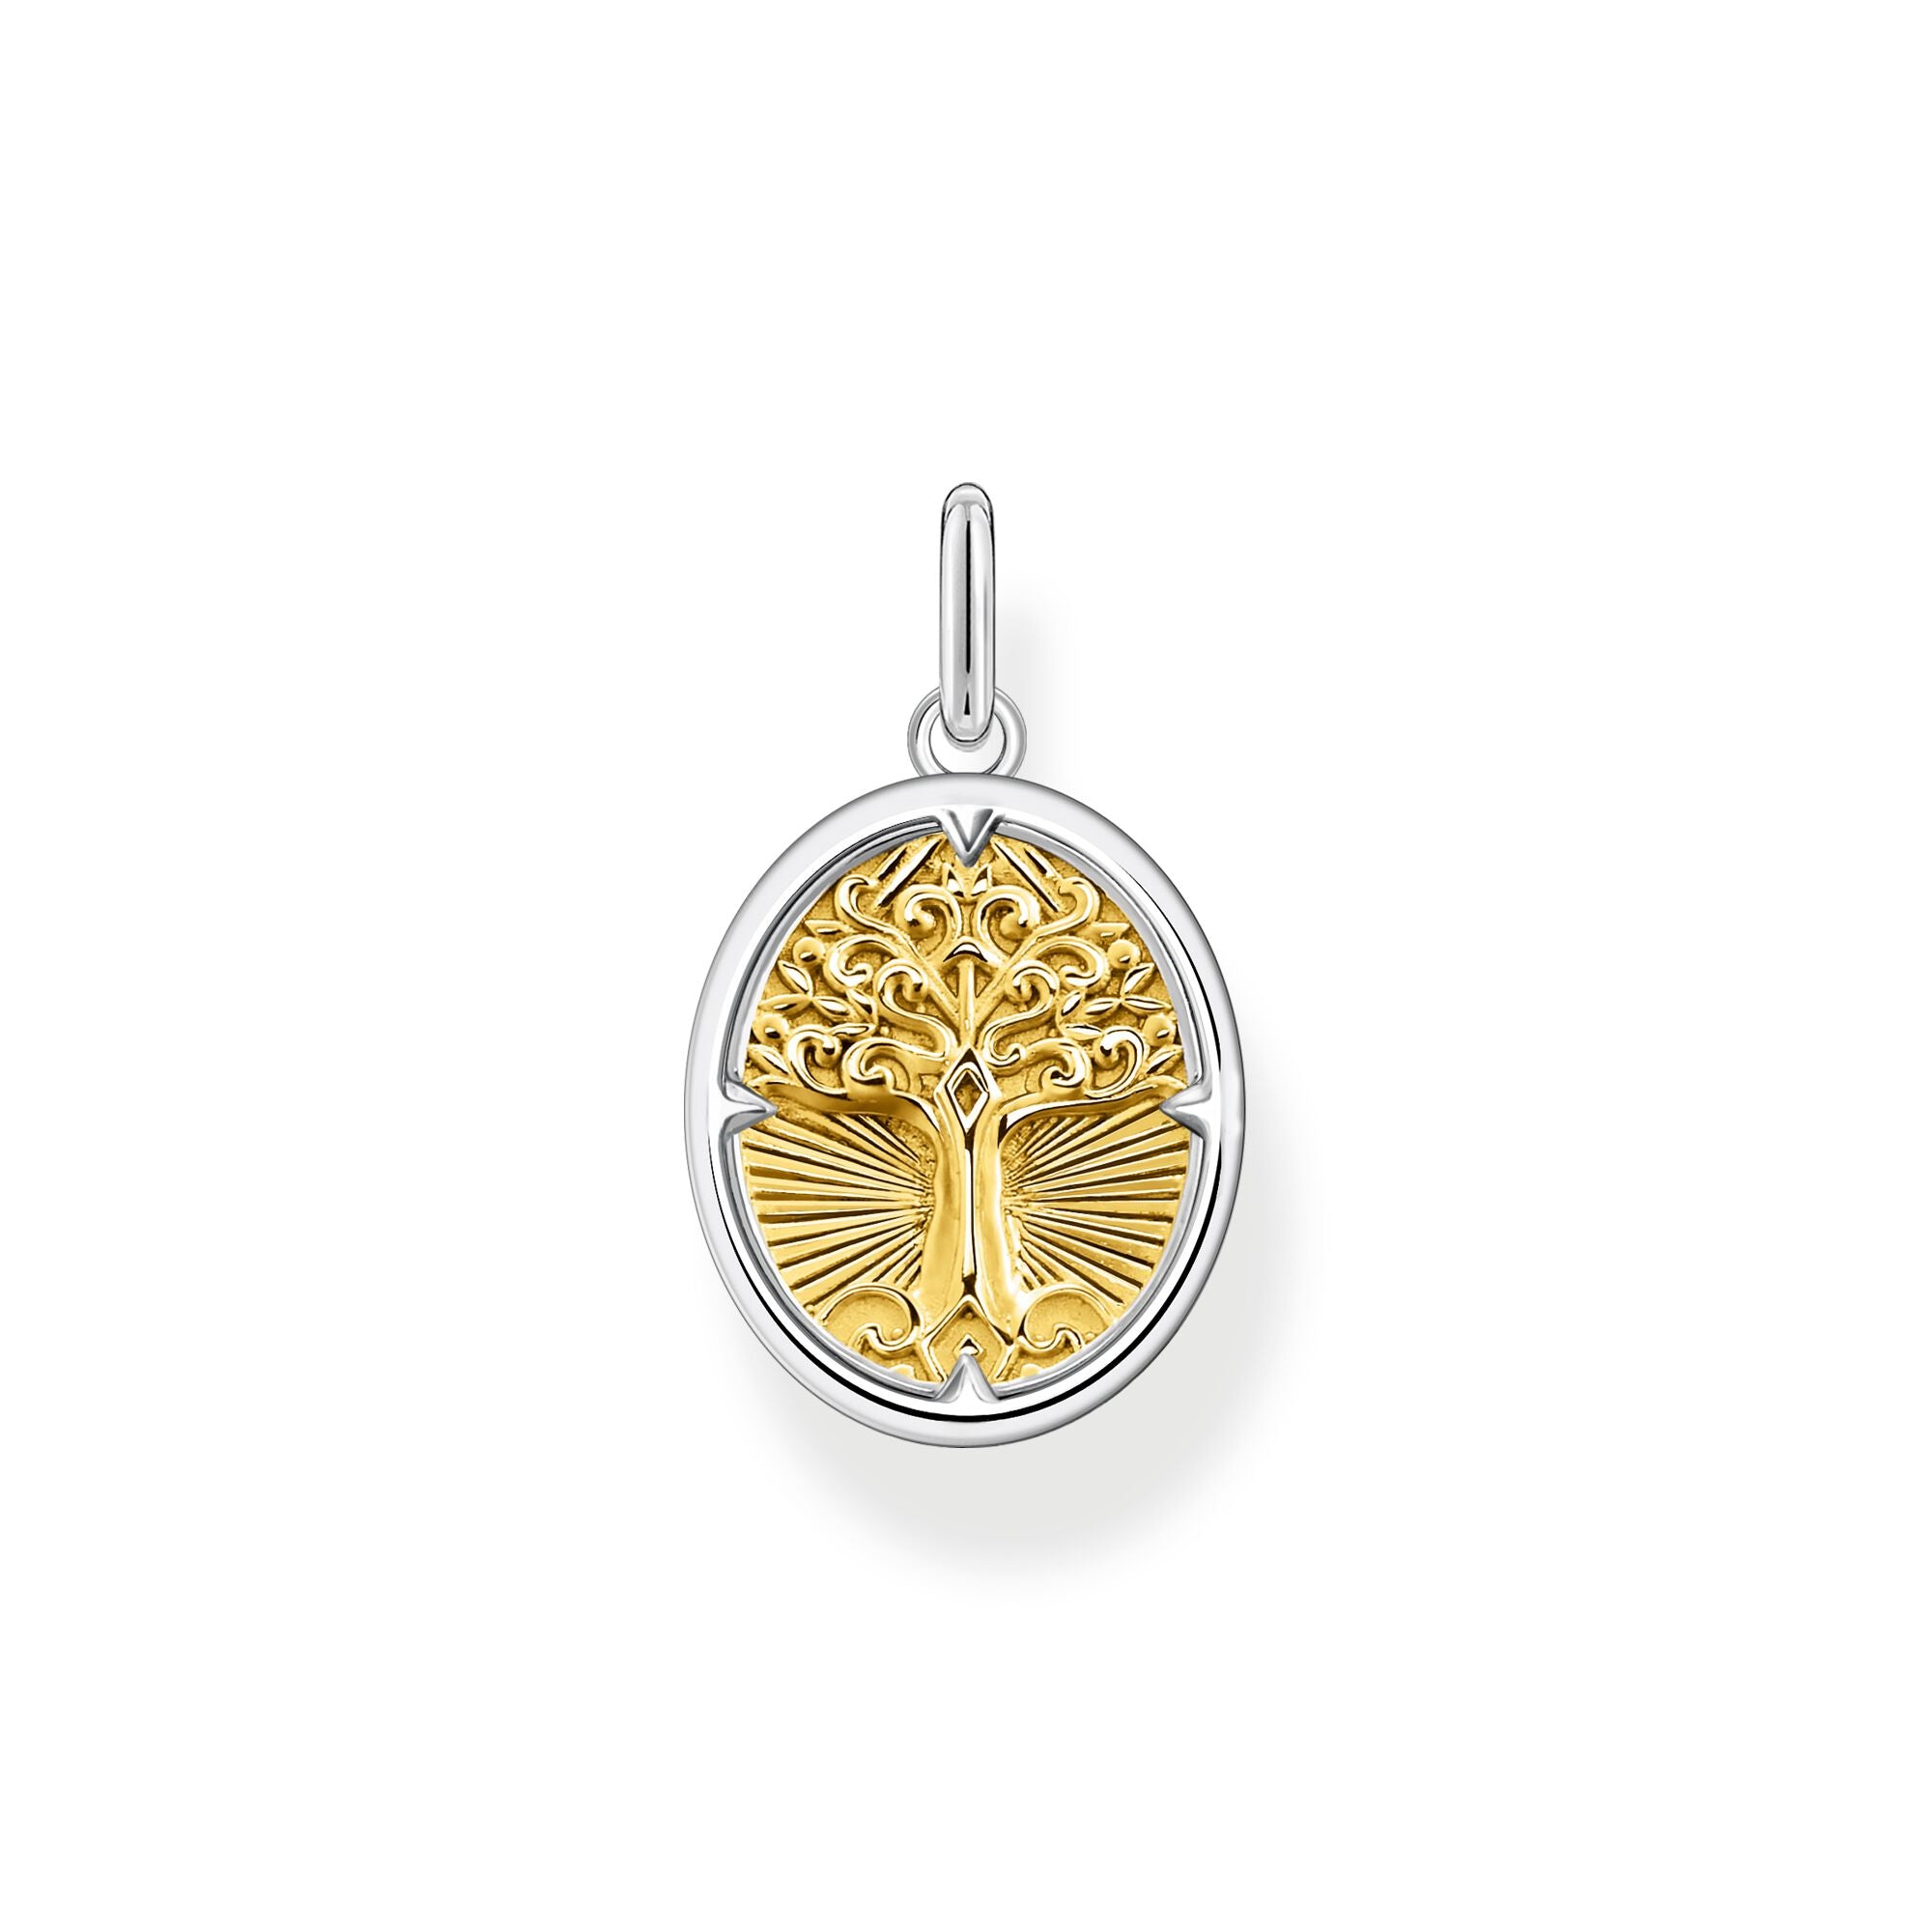 Thomas Sabo Oval Tree Pendant in Sterling Silver